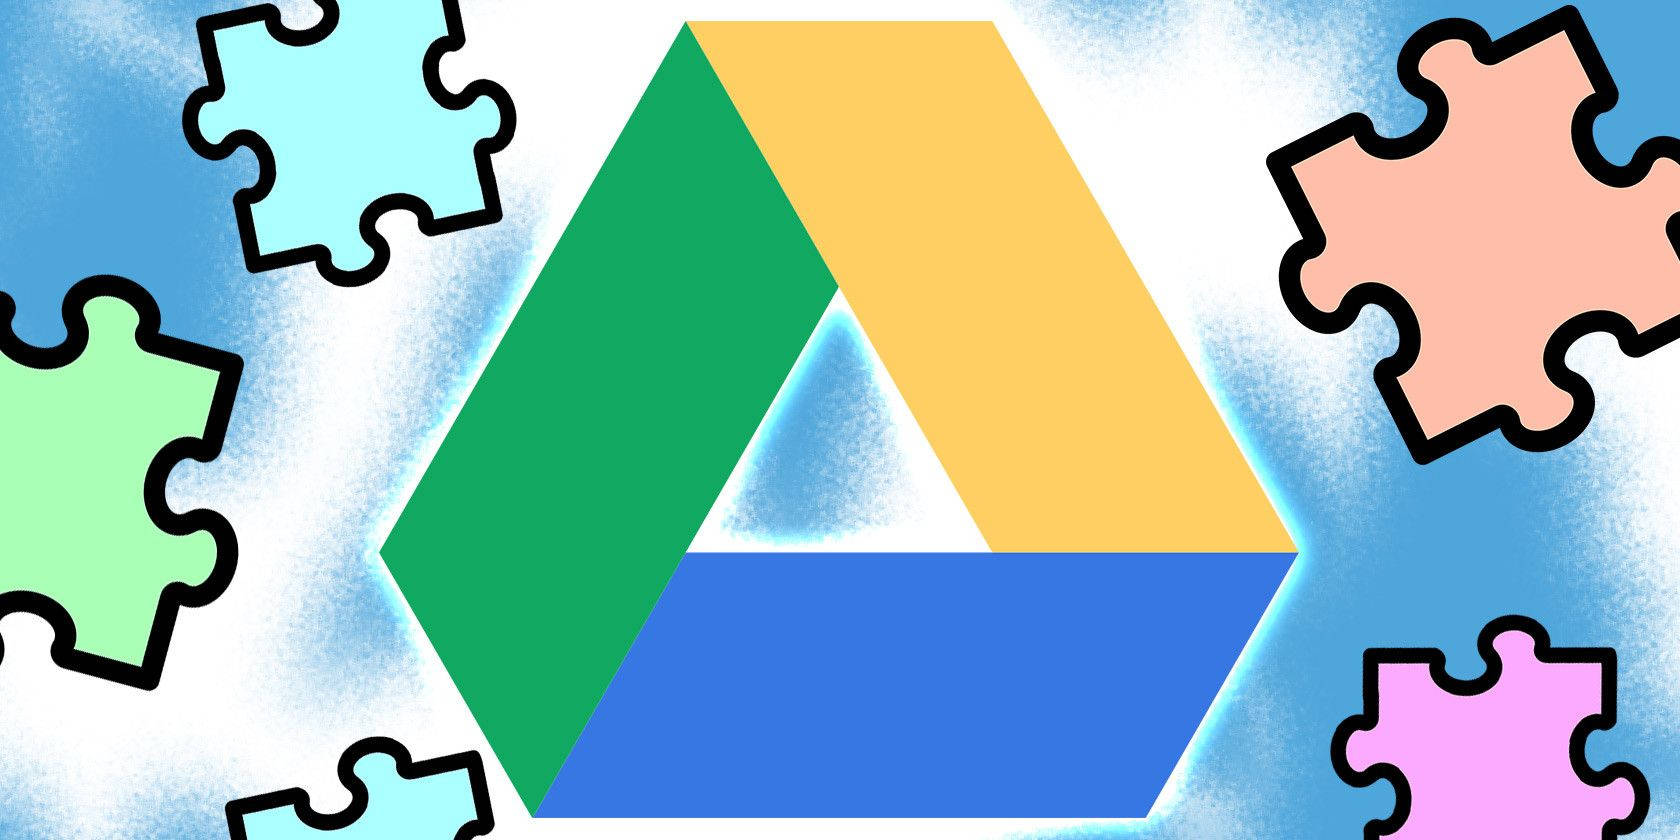 Google Drive With Puzzle Pieces Wallpaper